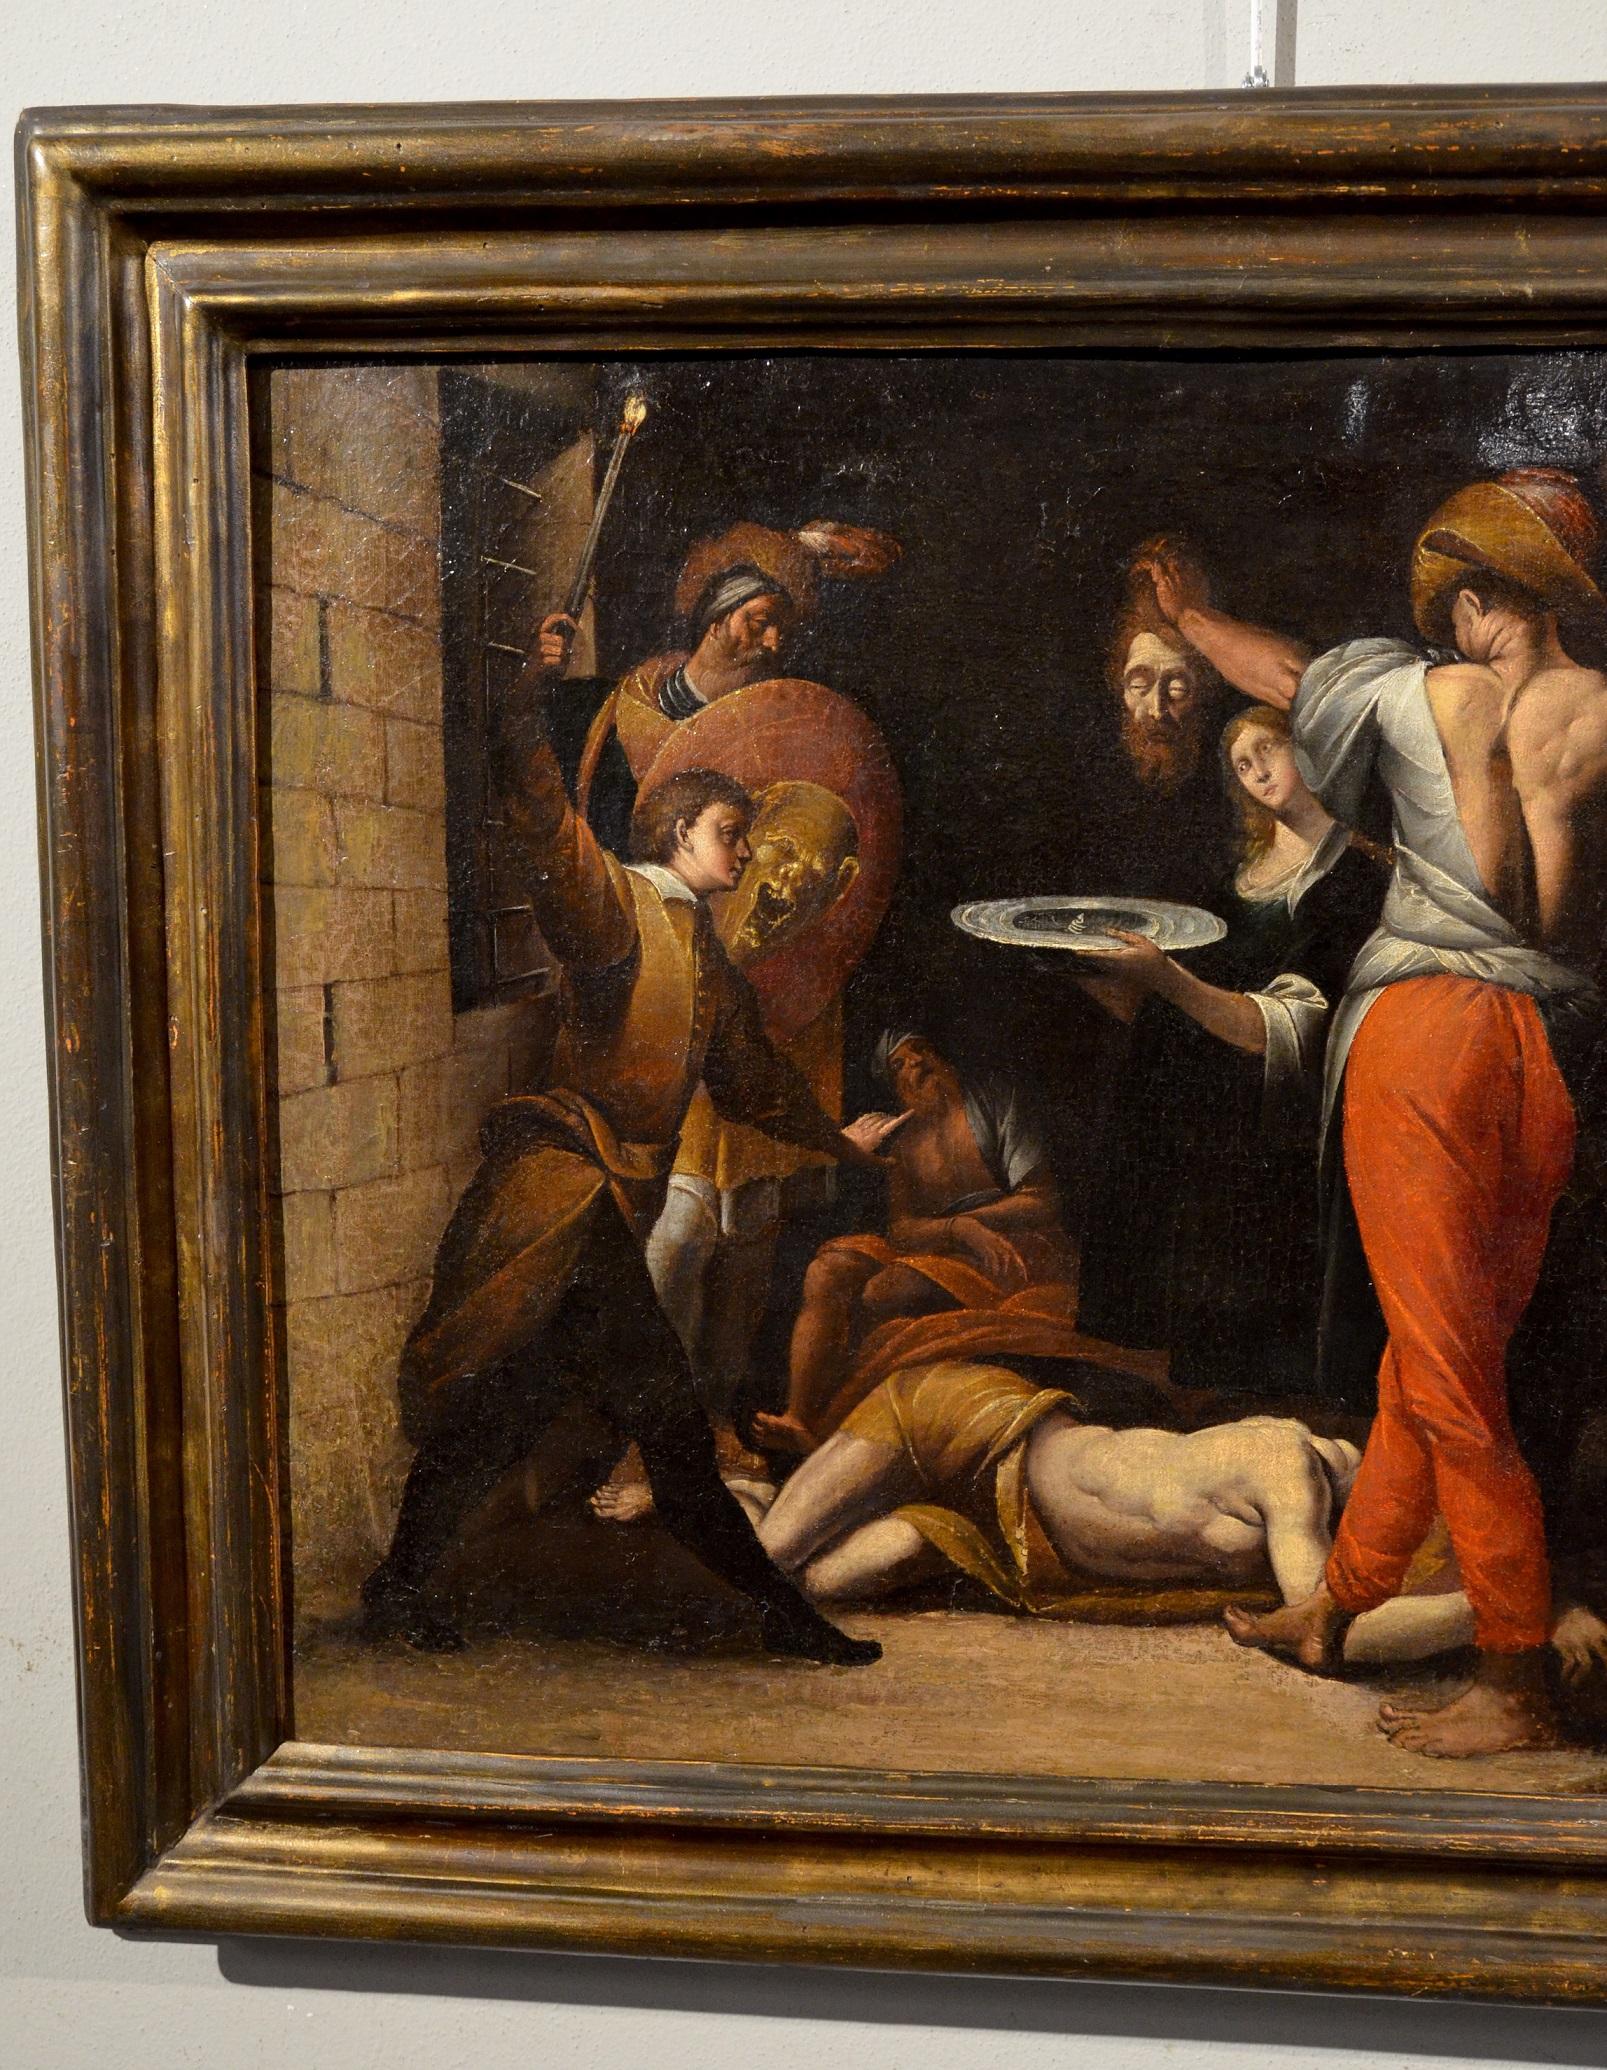 Lombard school of the early seventeenth century
Pier Francesco Mazzucchelli, known as Morazzone (Varese 1573 - Piacenza 1626) workshop
Beheading of St. John the Baptist

Oil on canvas, 56 x 78 cm
In an antique frame 74 x 95

We share a work of great